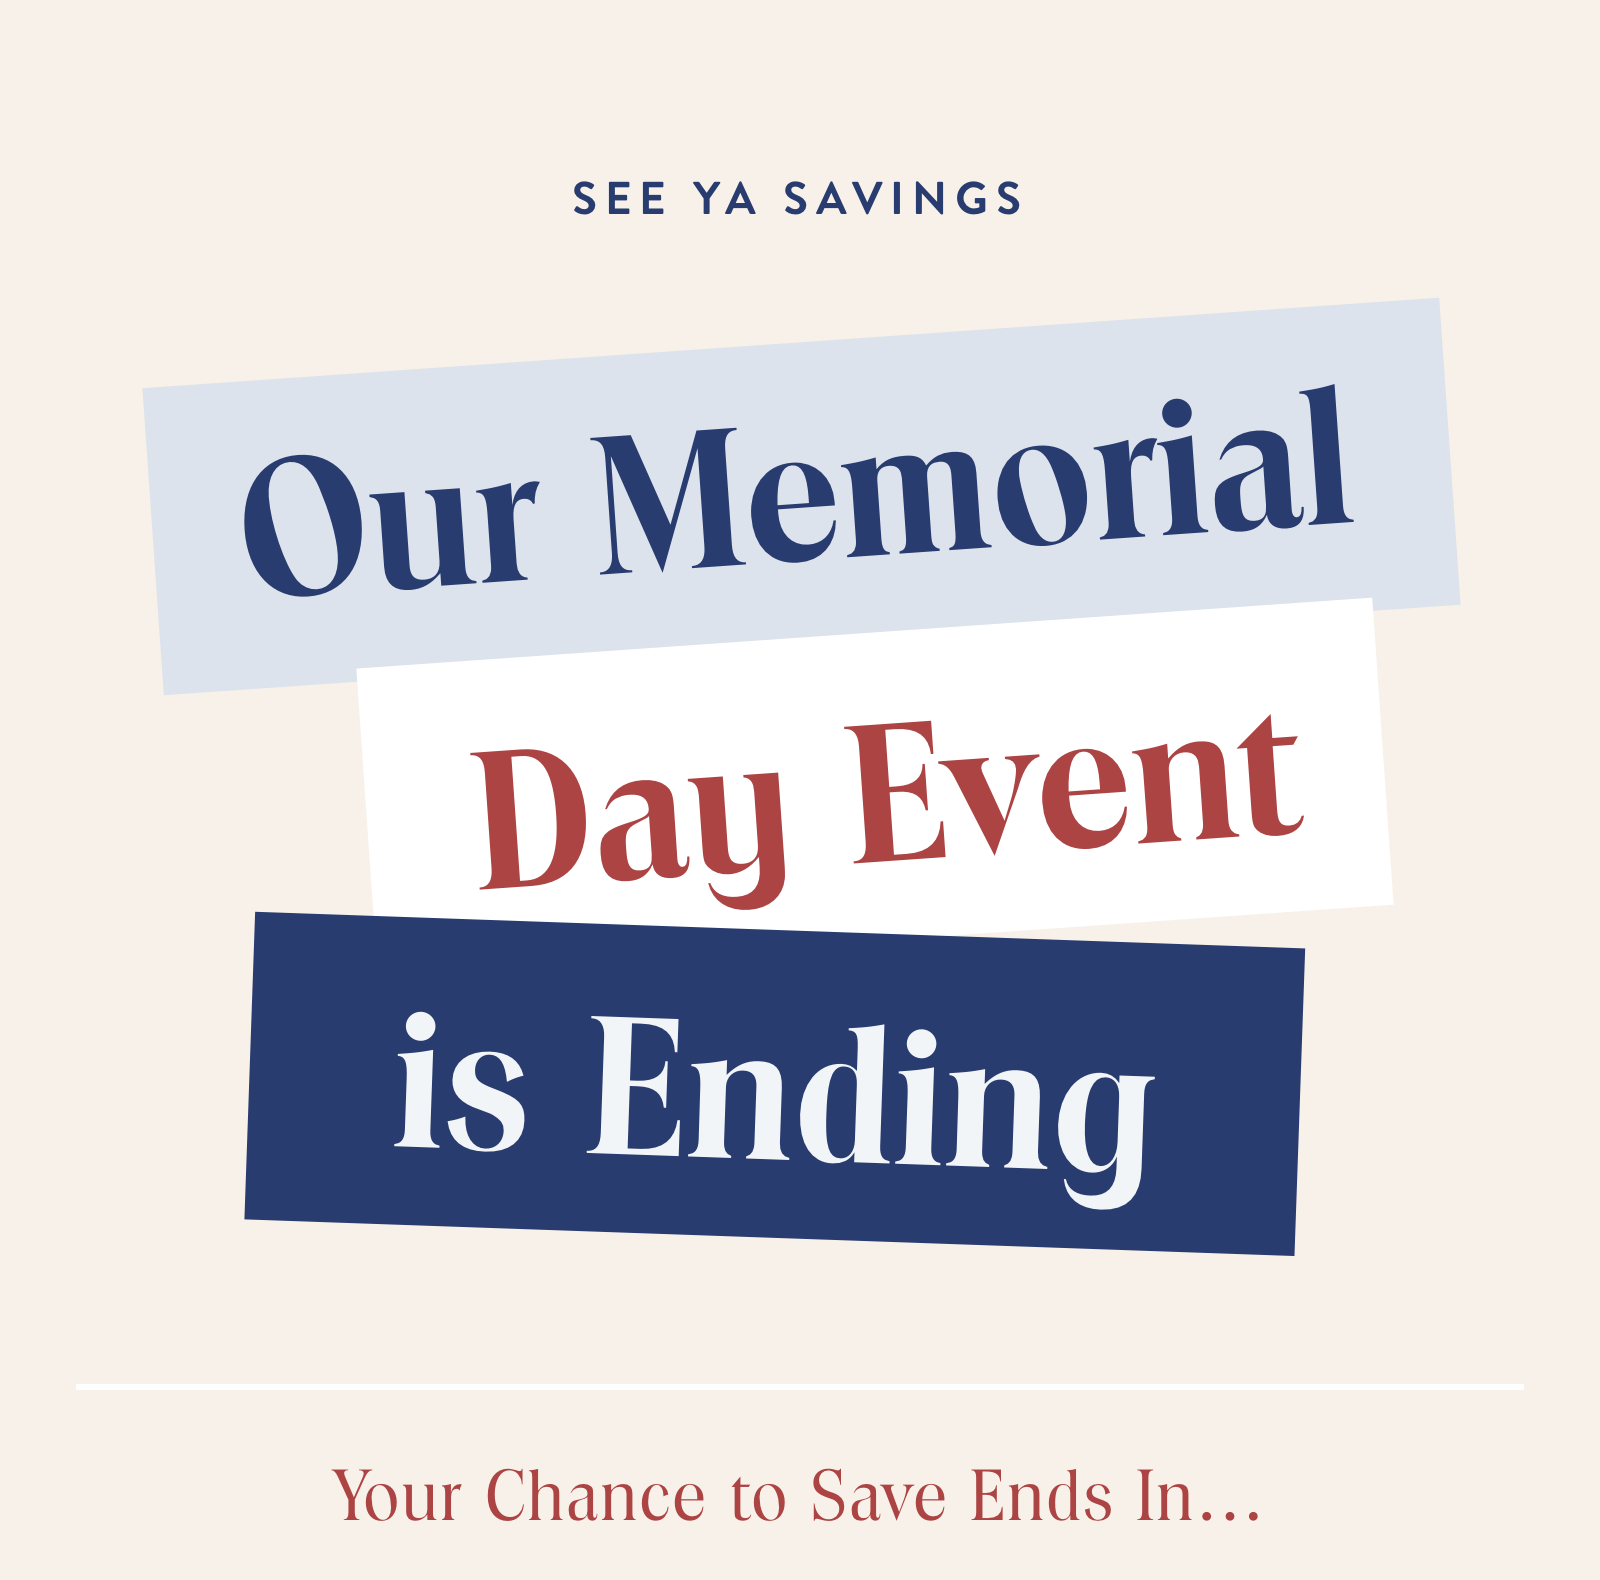 Our Memorial Day Event is Ending